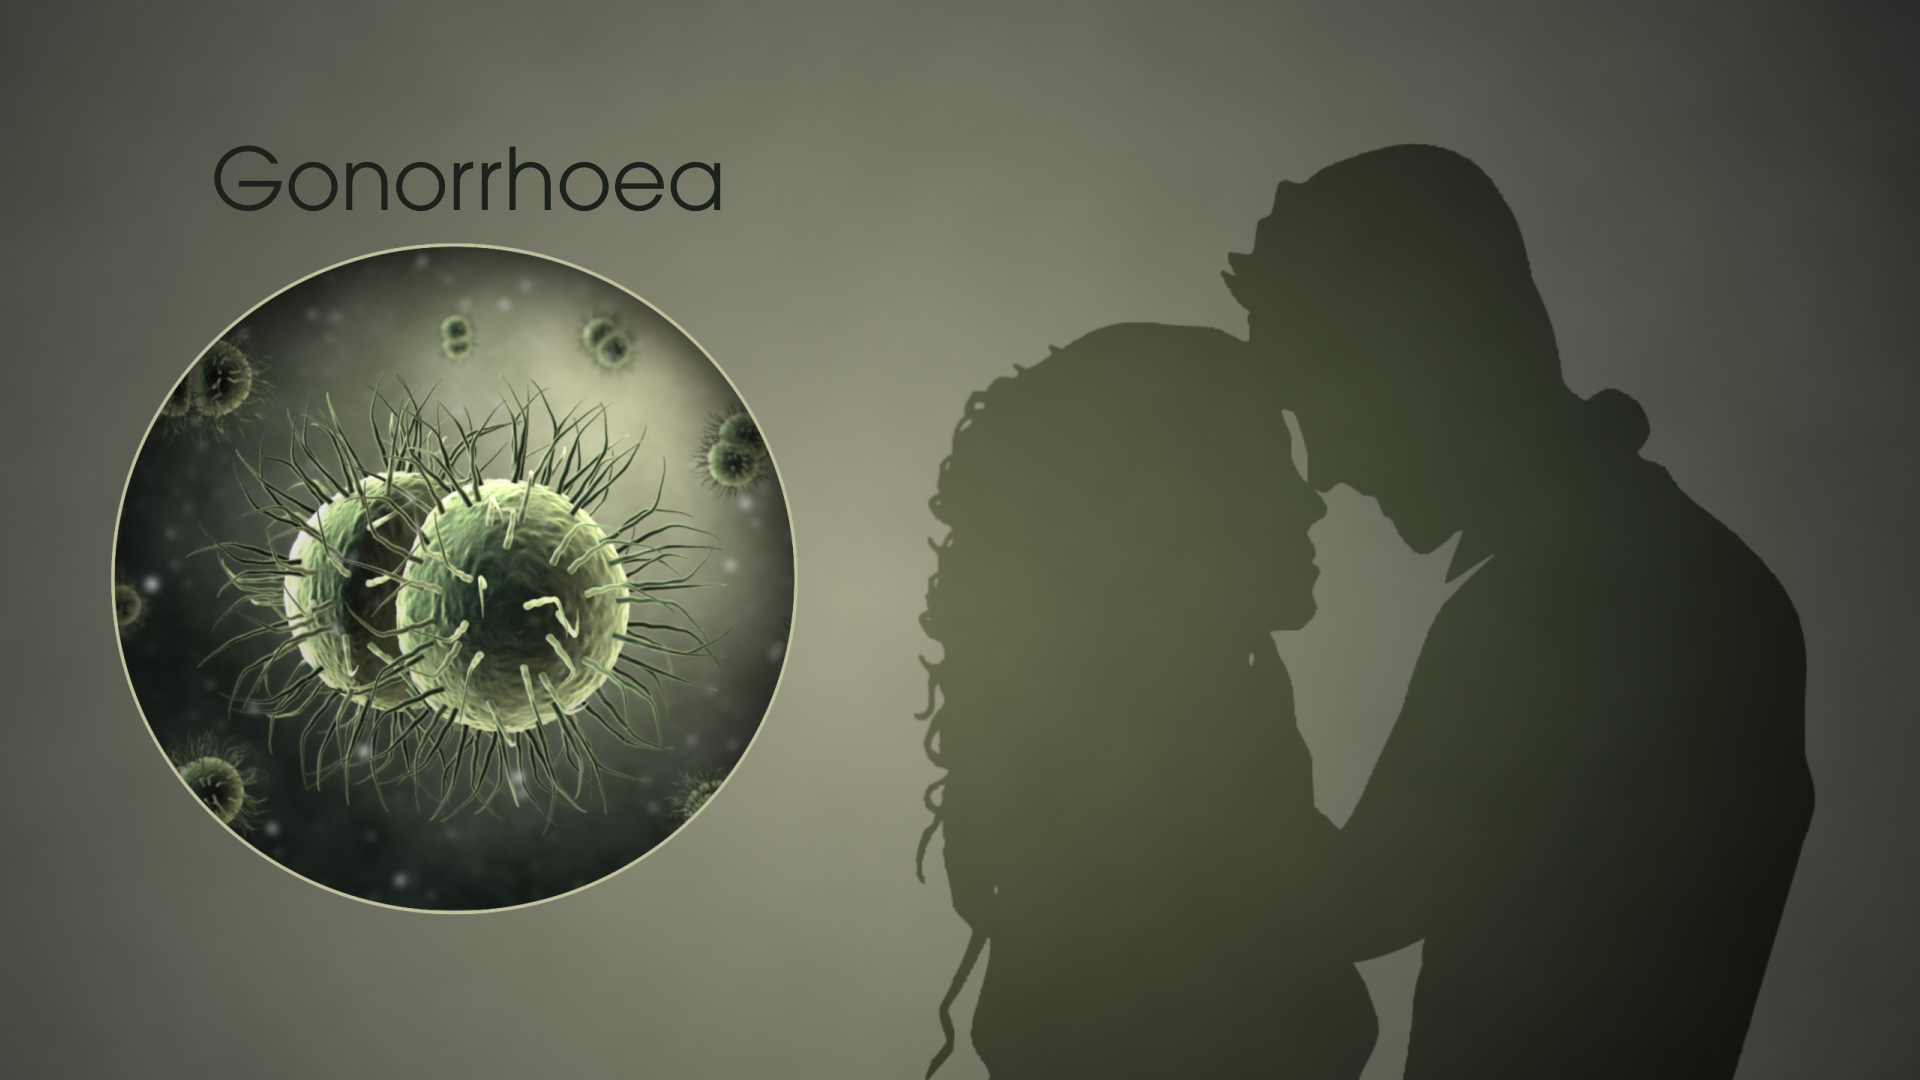 3D Medical Animation still showing sexually transmitted bacterium “Neisseria gonorrhoeae”